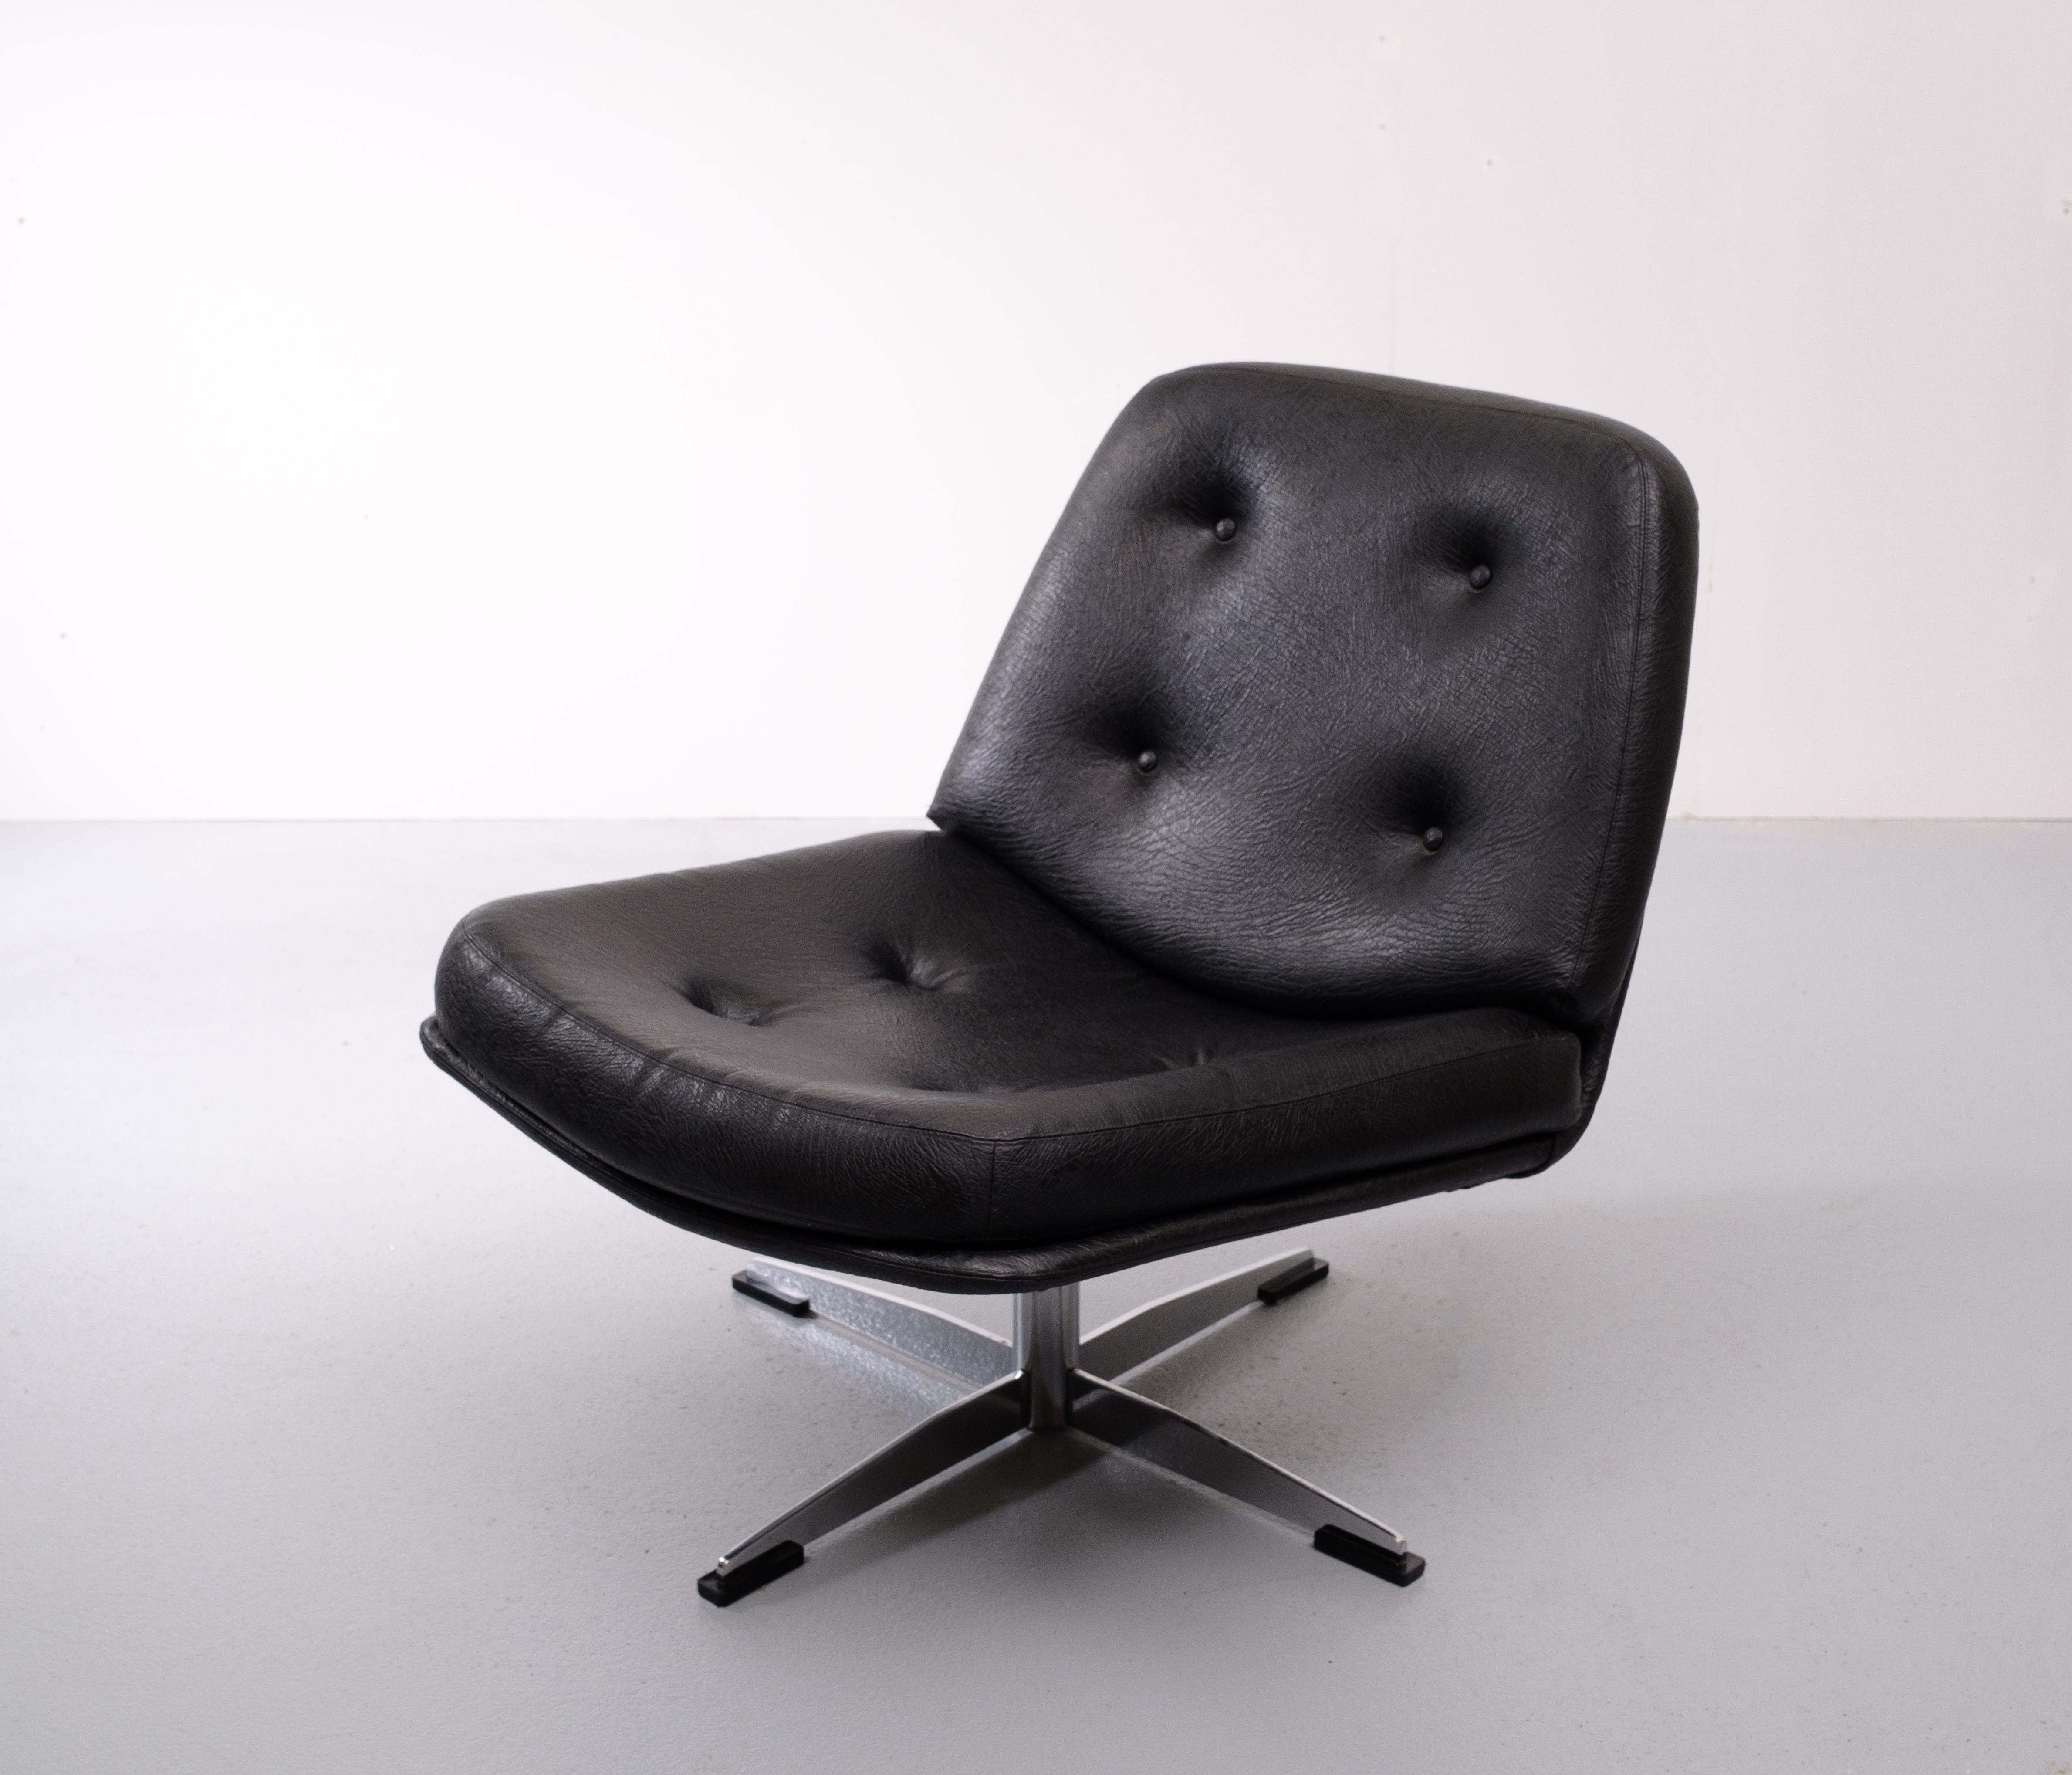 Swivel chair designed by Gillis Lundgren for Ikea in the 1960s. Model Mila.
The chair is upholstered in black faux leather and stands on a chrome star base.
Sit comfortably.





